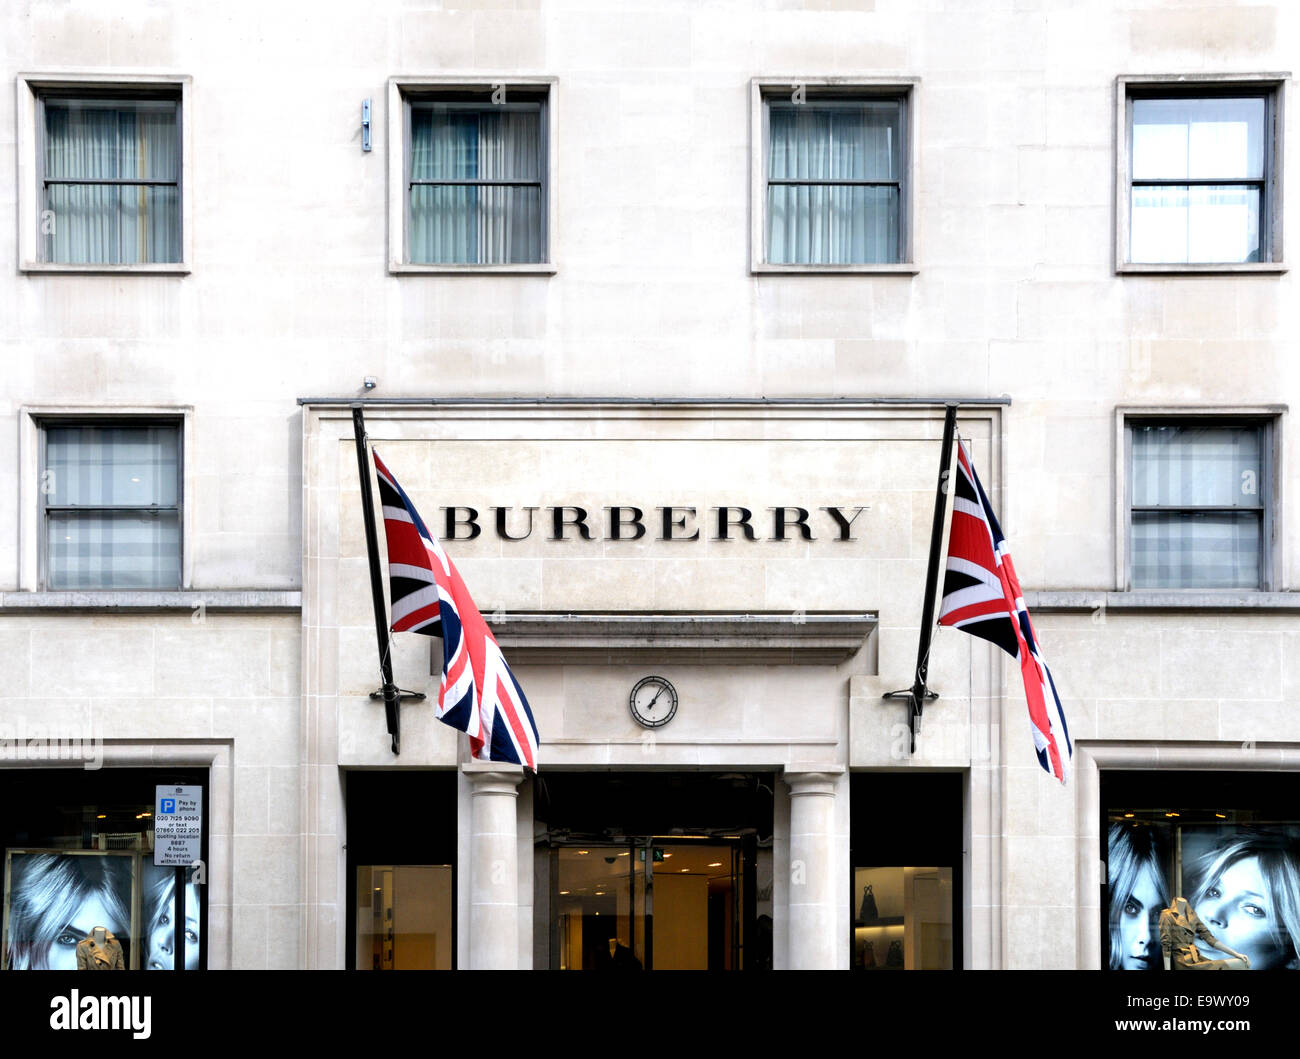 Total 88+ imagen burberry store london england - Abzlocal.mx